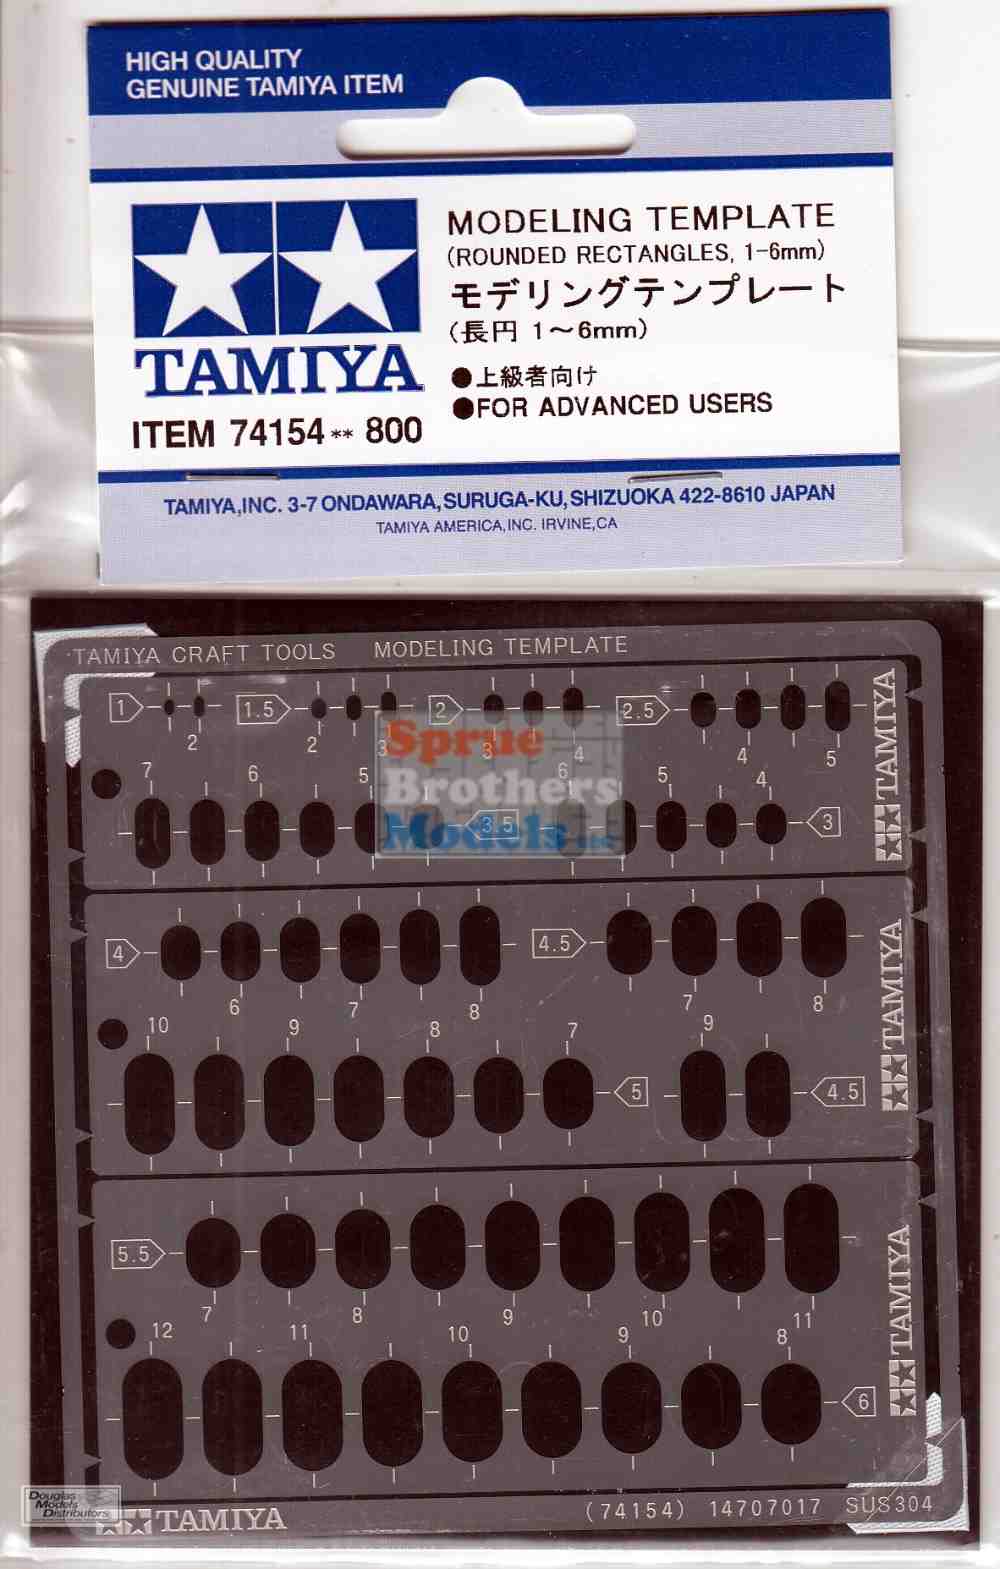 Tamiya 74154 MODELING TEMPLATE Rounded Rectangles/1-6mm 